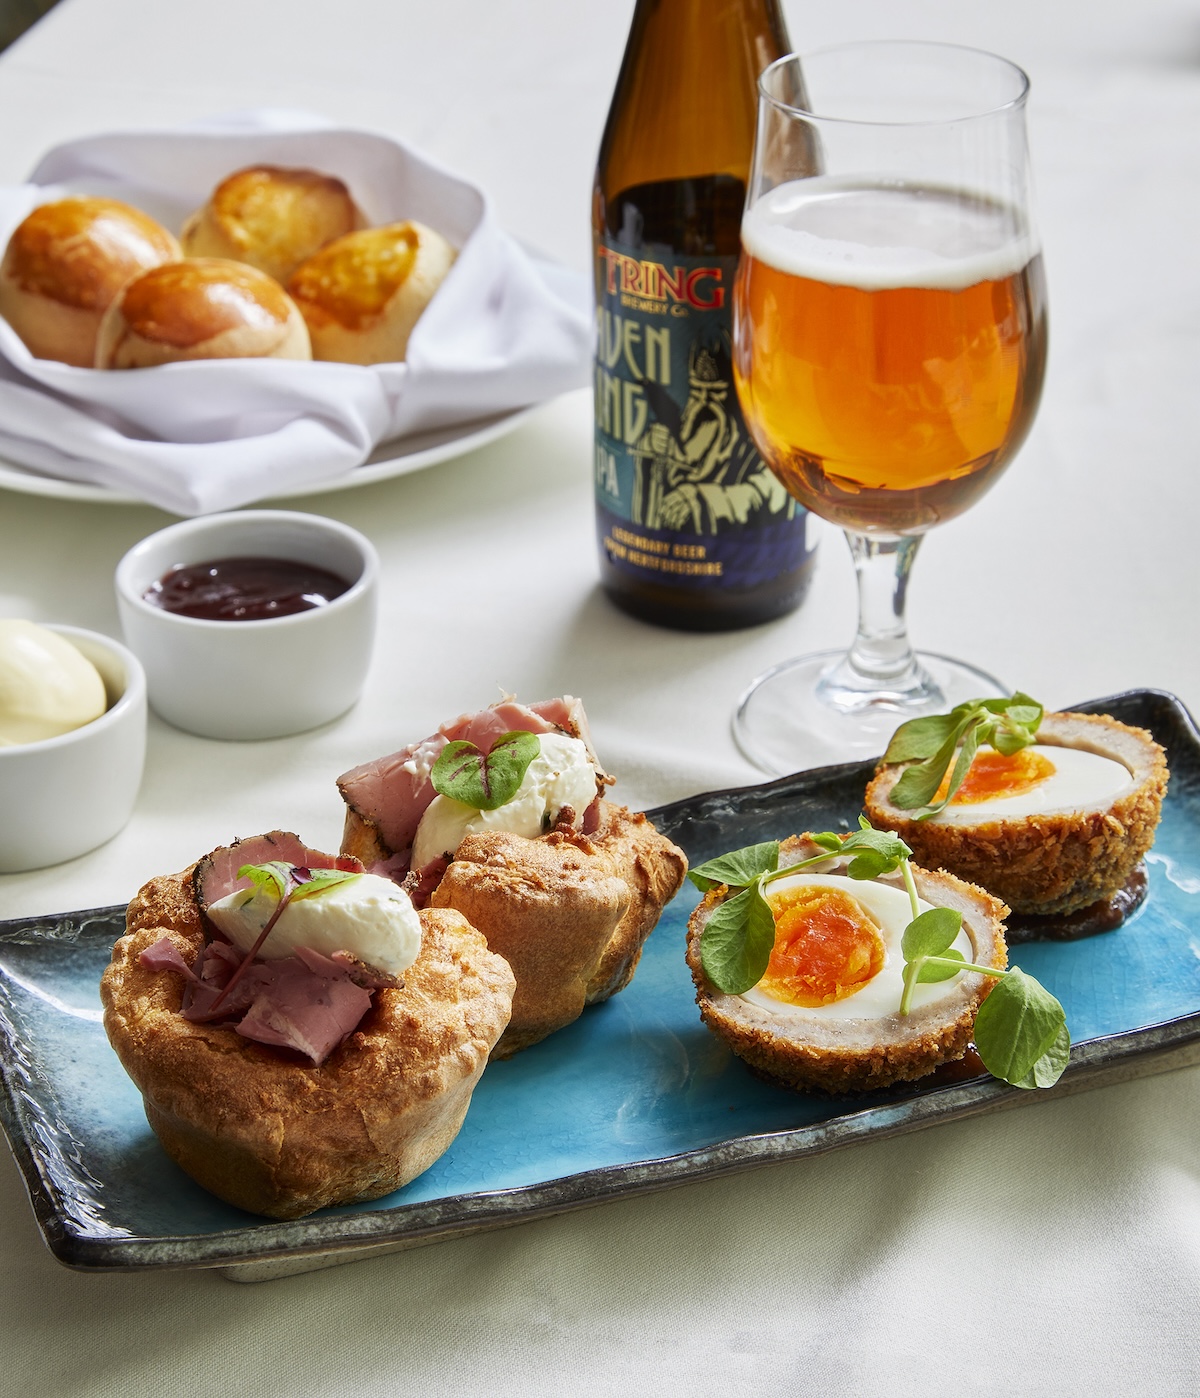 Sunday Roast with Beer or Wine Flight at Sopwell House